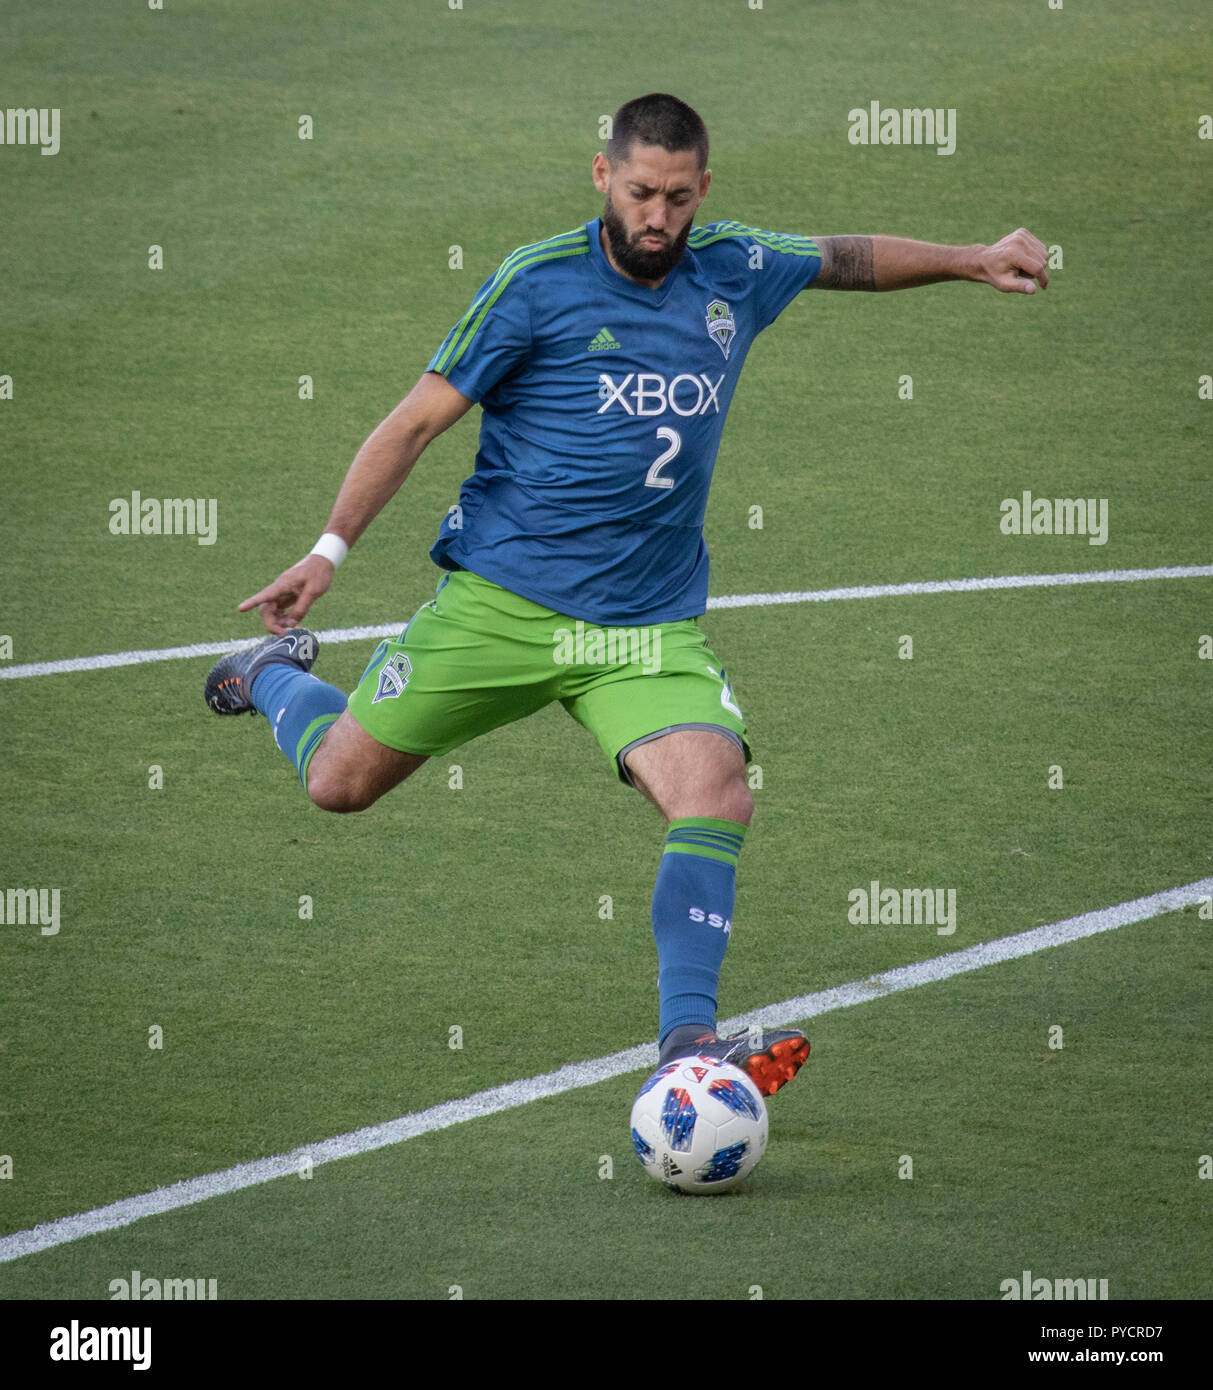 Seattle Sounder Forward Clint Dempsey with the strike Stock Photo